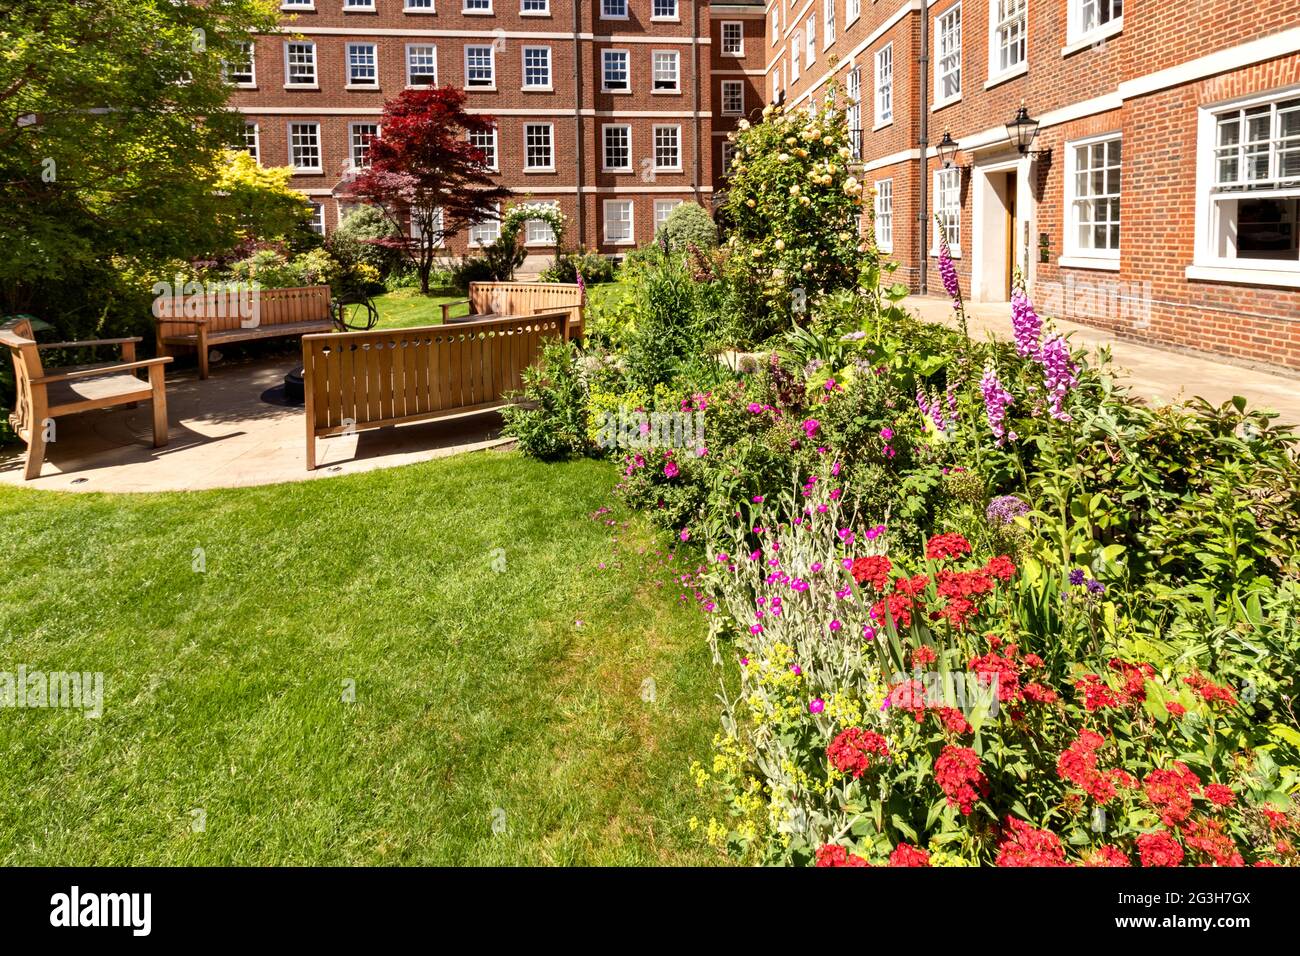 LONDON ENGLAND MIDDLE TEMPLE GARDENS WITH WOODEN BENCHES IN EARLY SUMMER Stock Photo